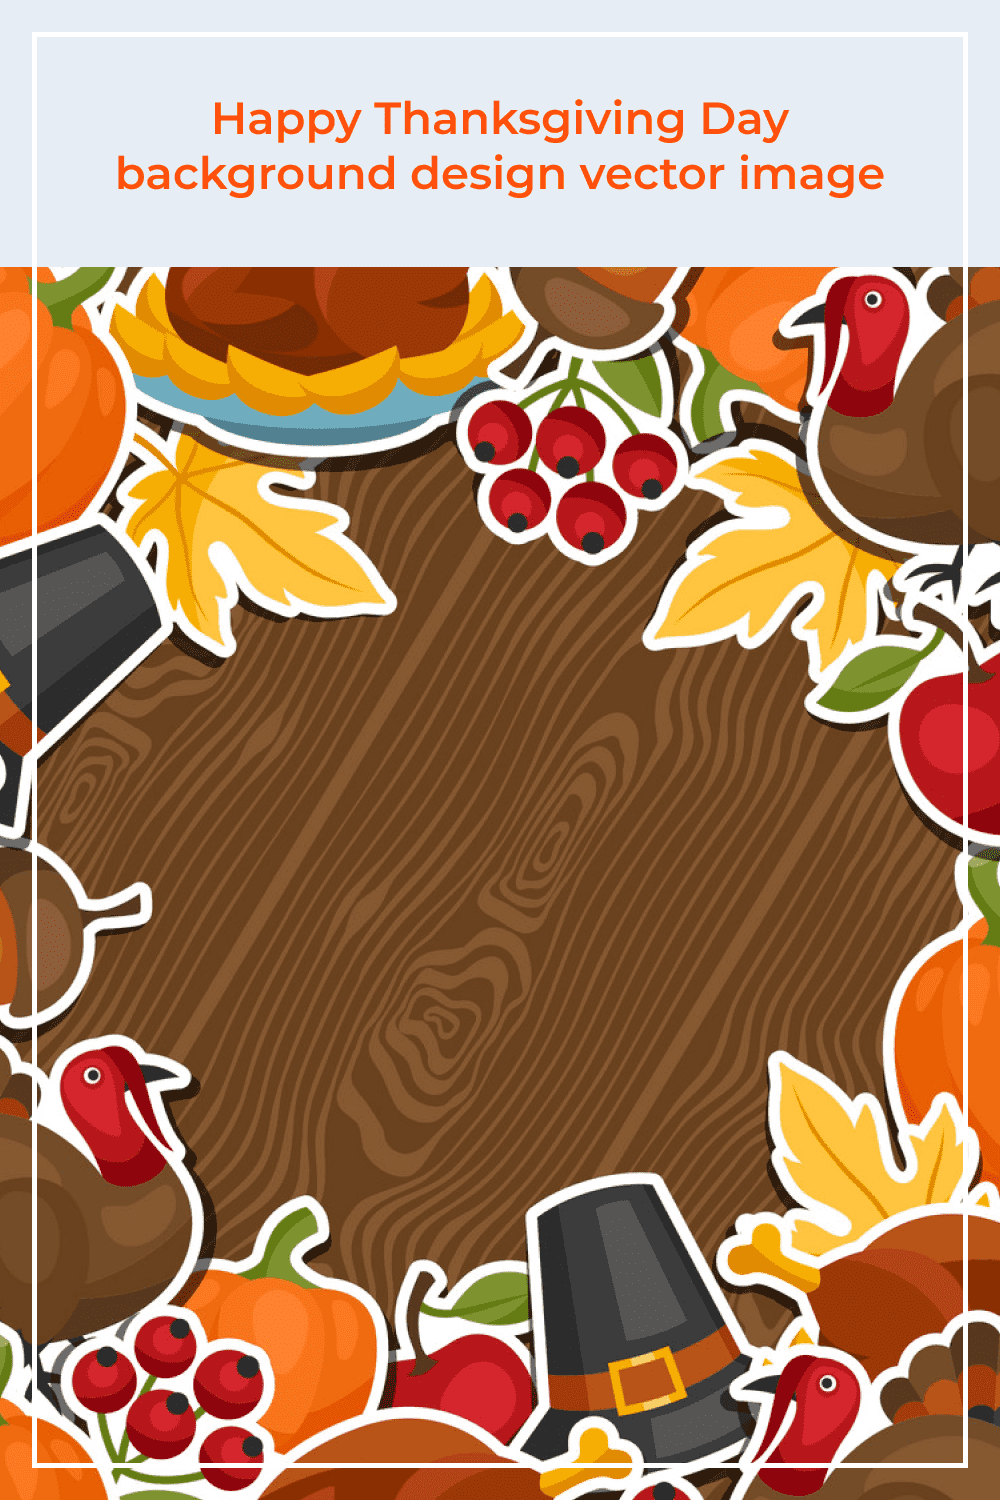 Happy Thanksgiving Day background design vector image.